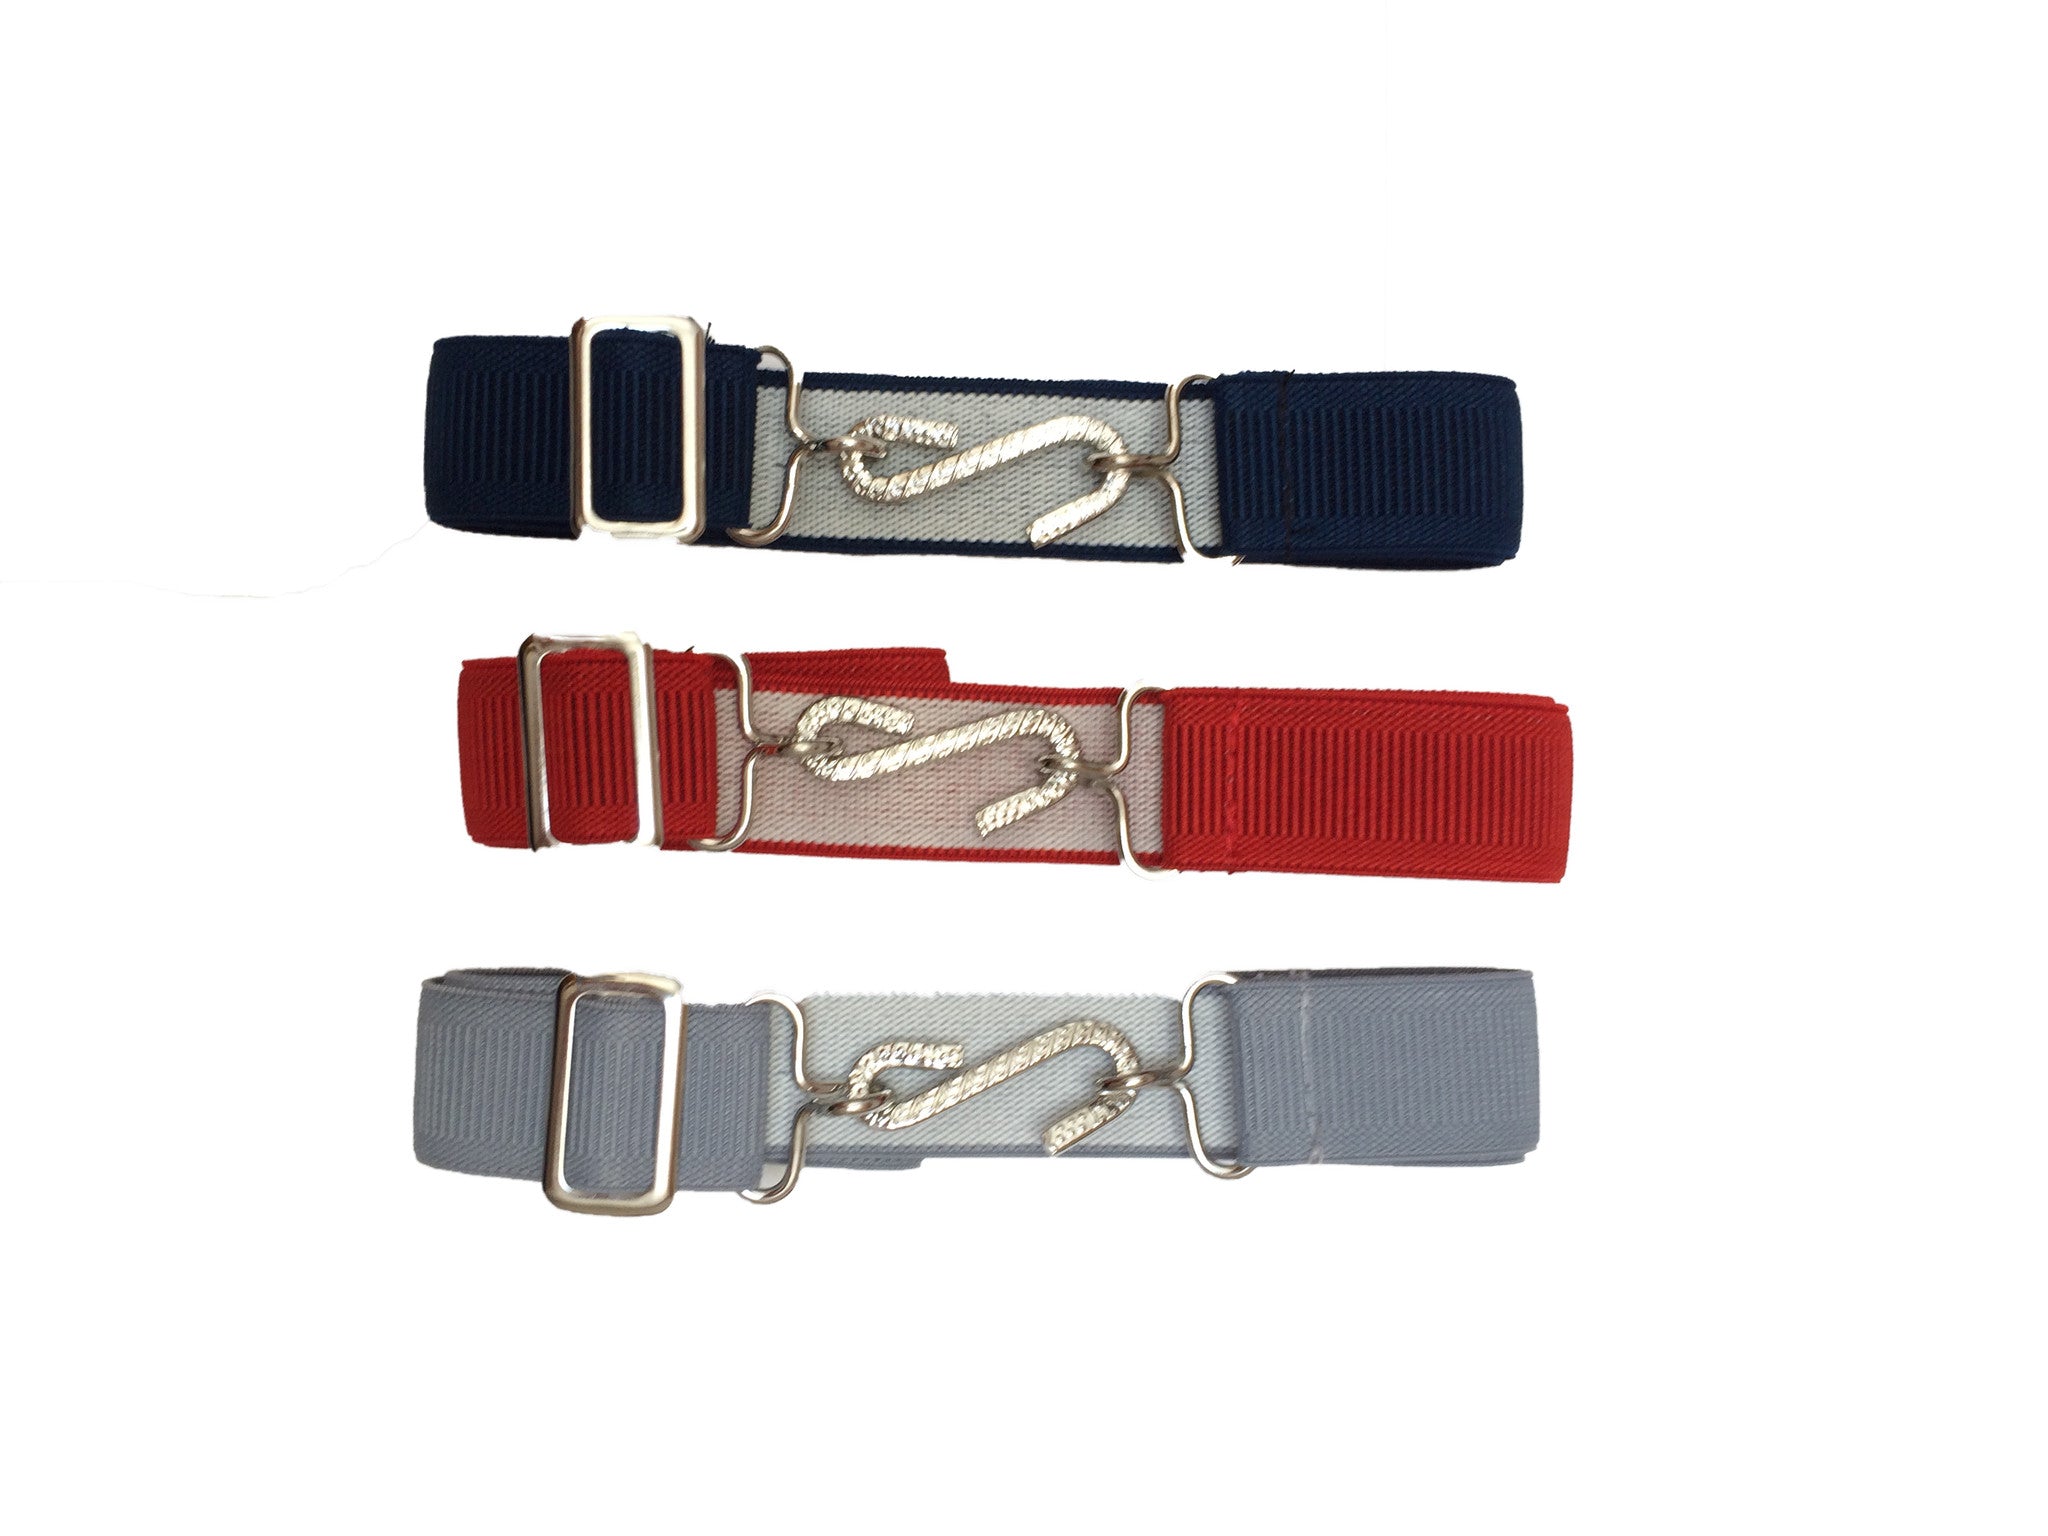 Black and Navy Snake Belts - suitable for school!